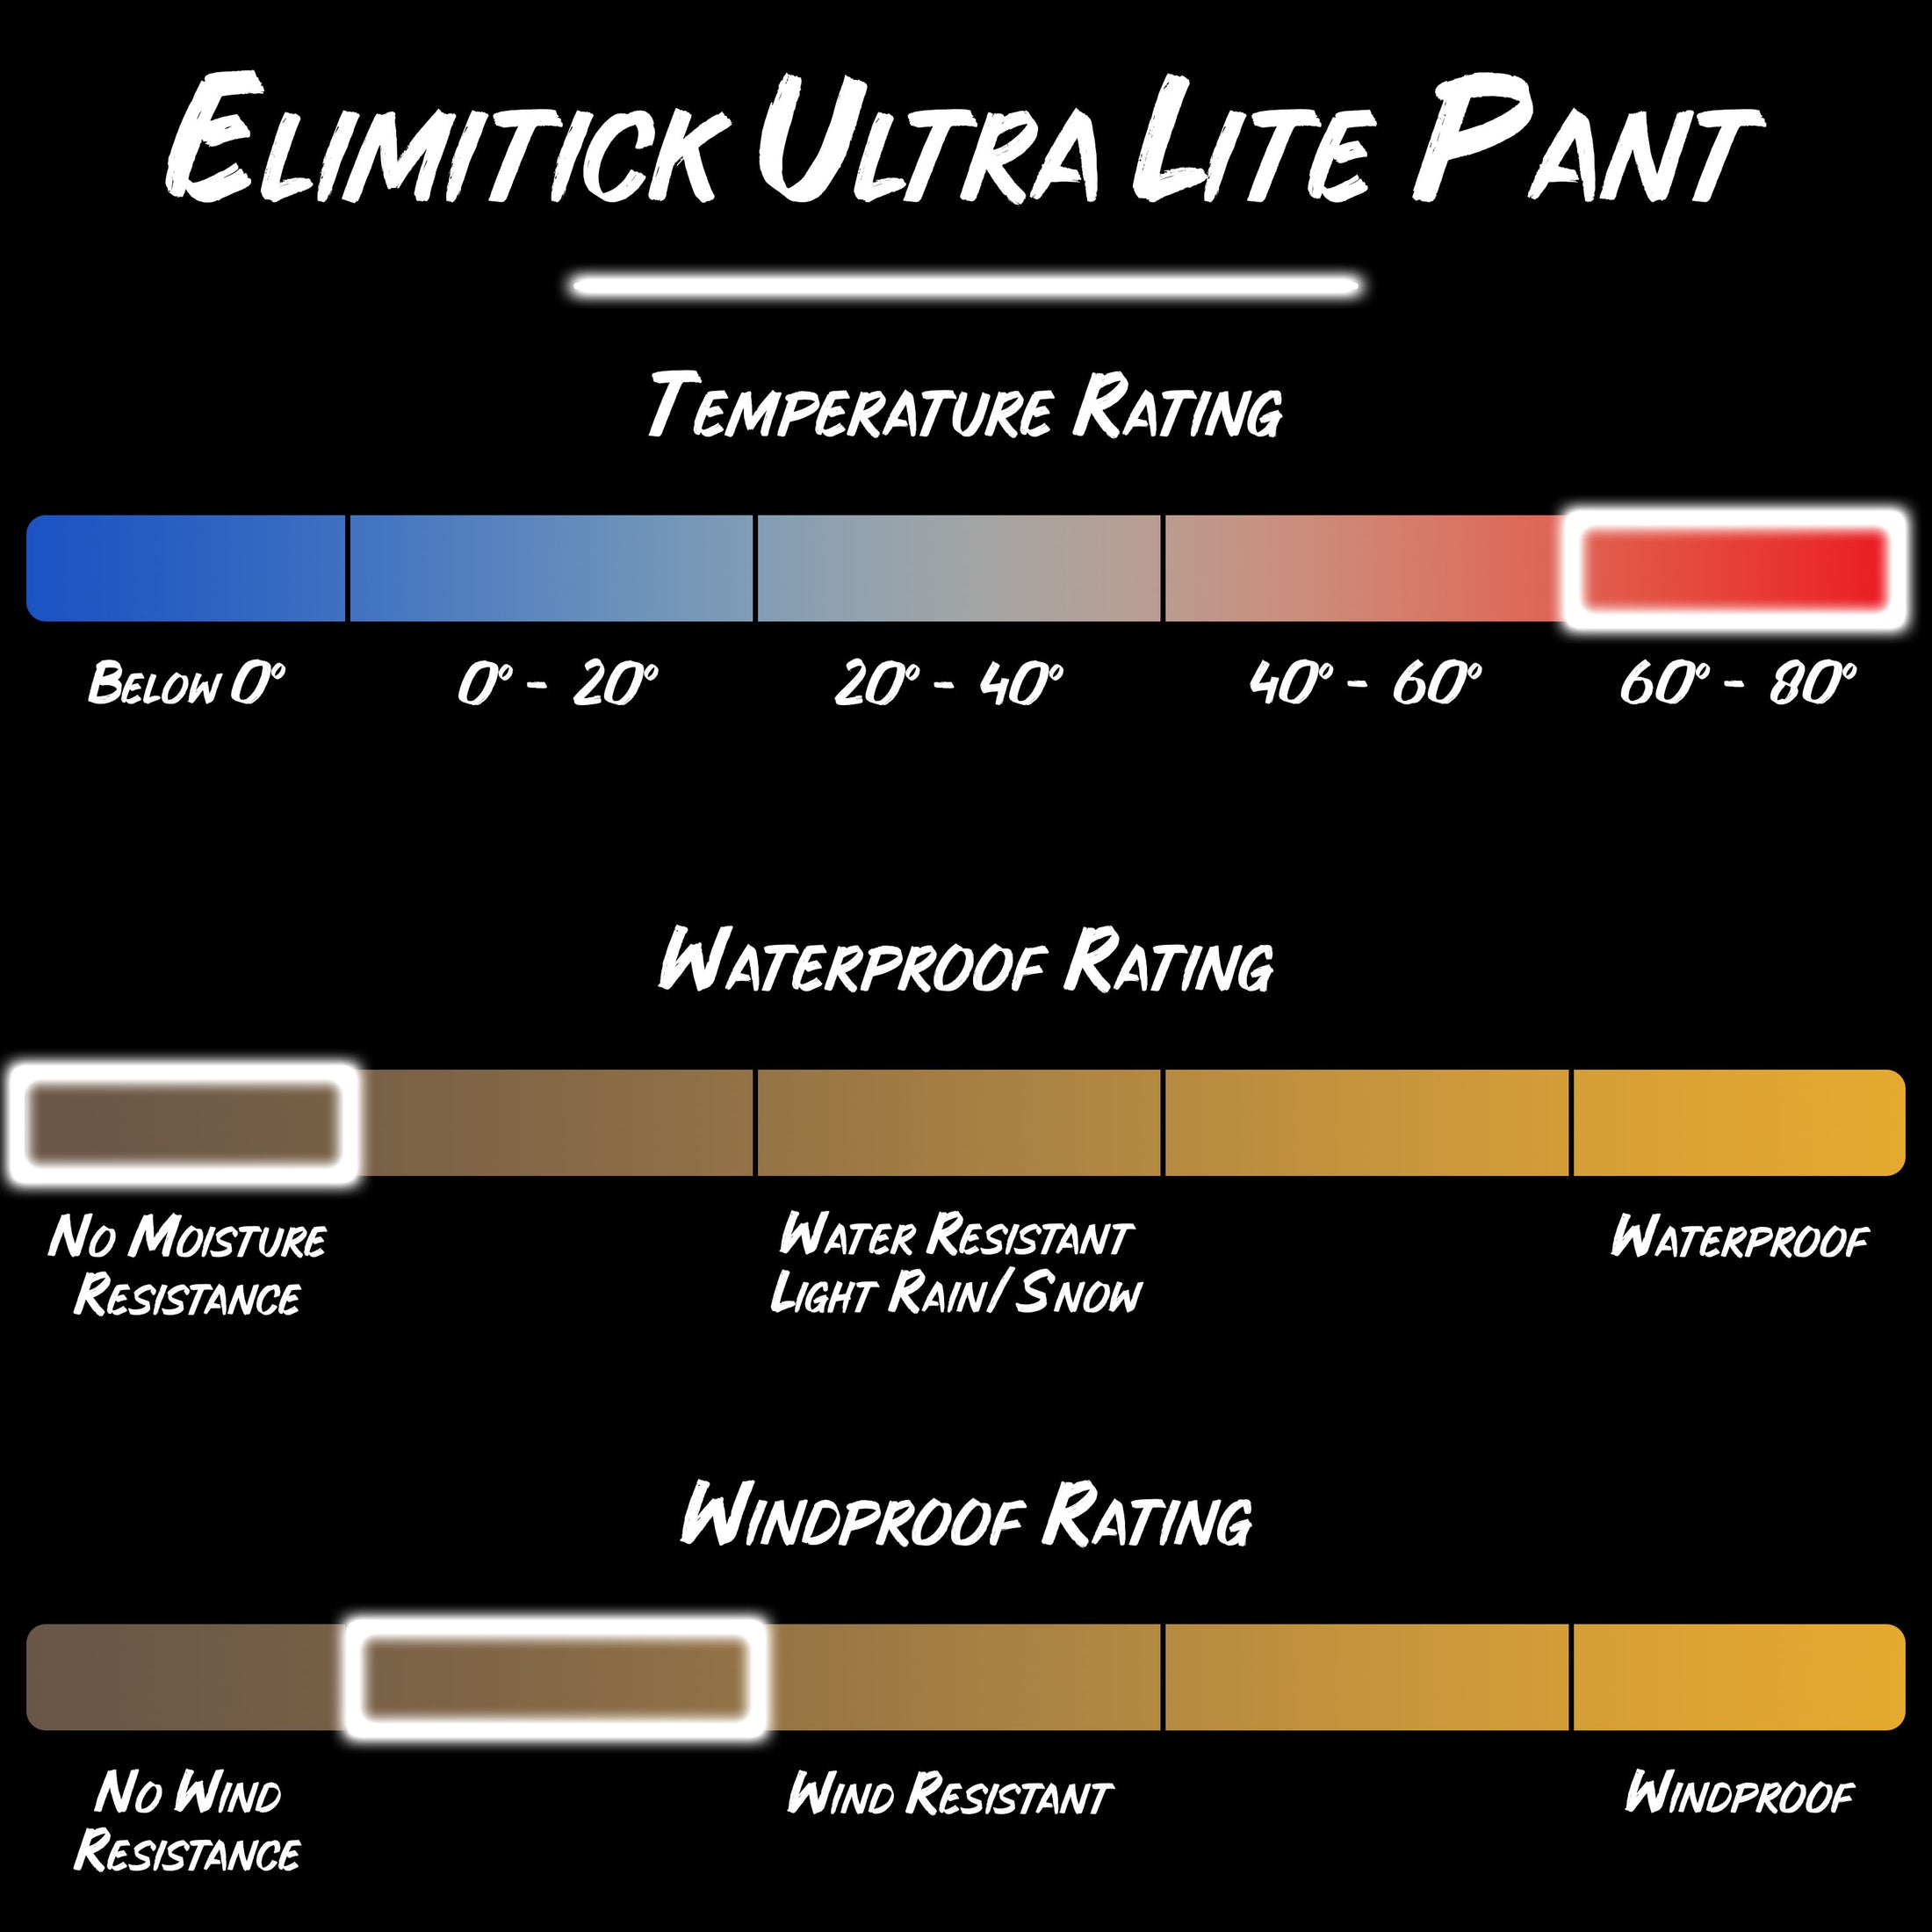 Elimitick ultra lite pant product specifications.